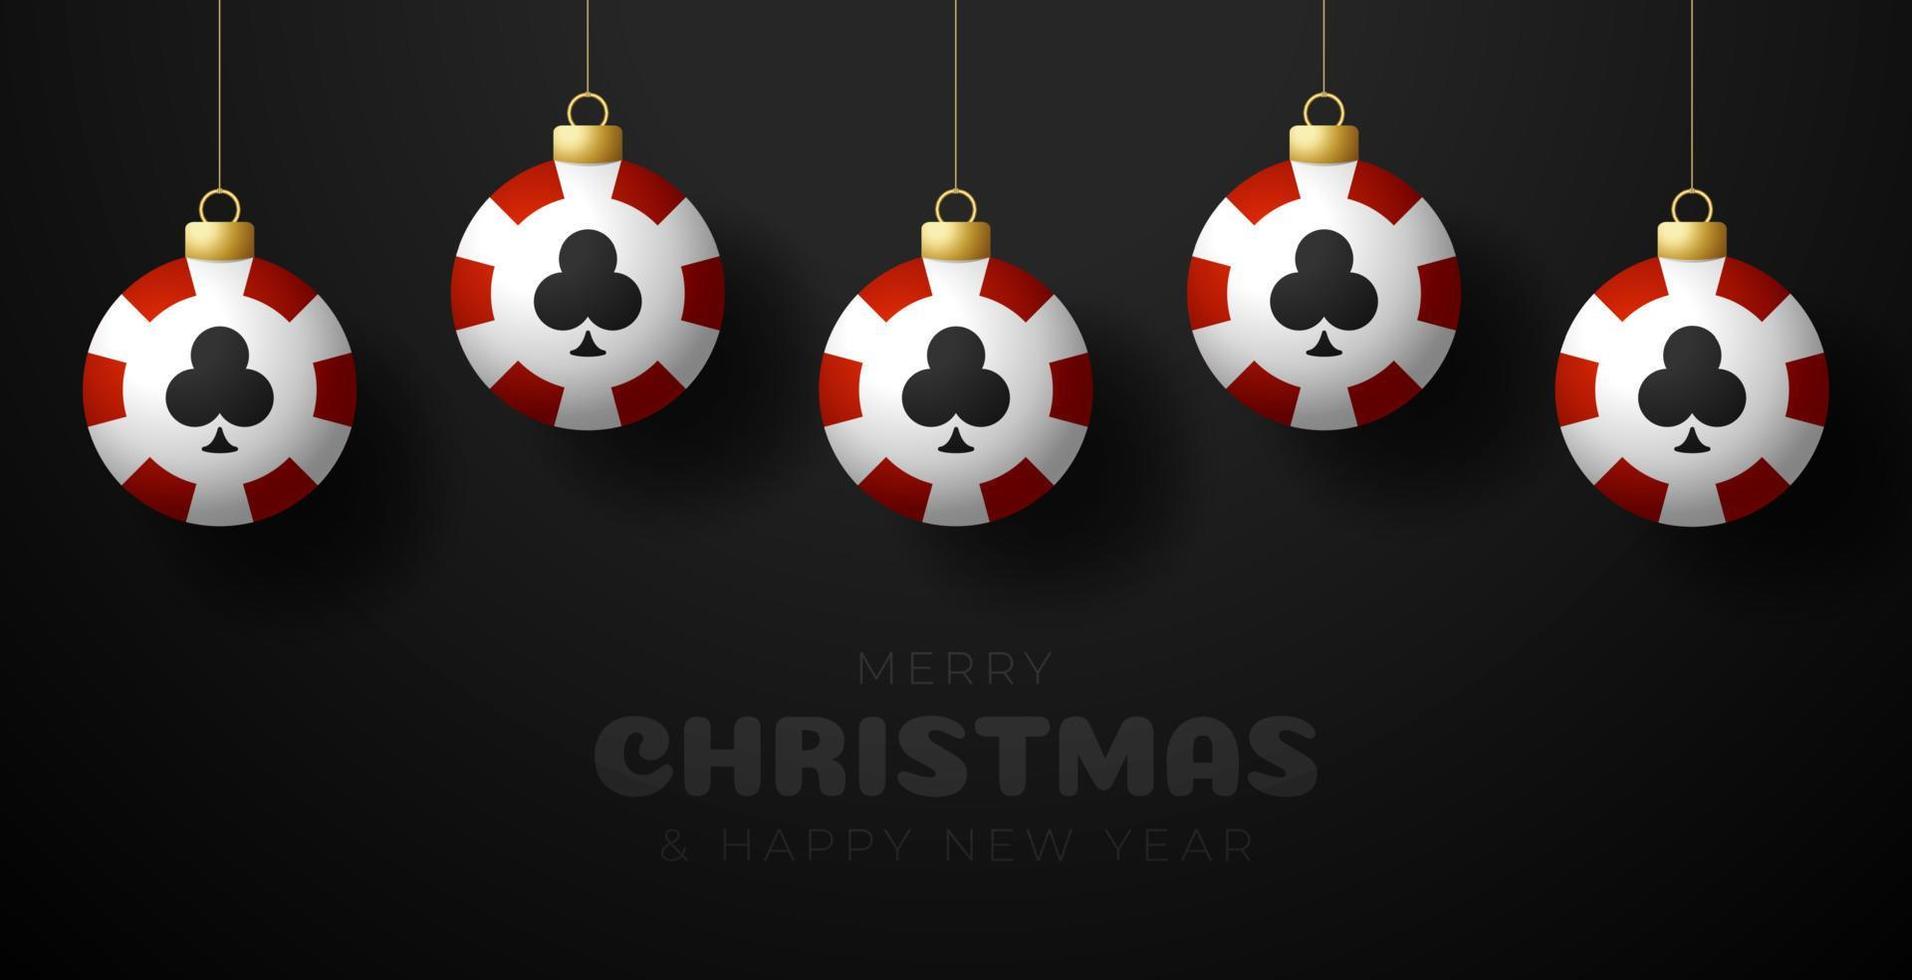 casino christmas greeting card. Merry Christmas and Happy New Year Hang on a thread casino chip as a xmas ball. sport Vector illustration.